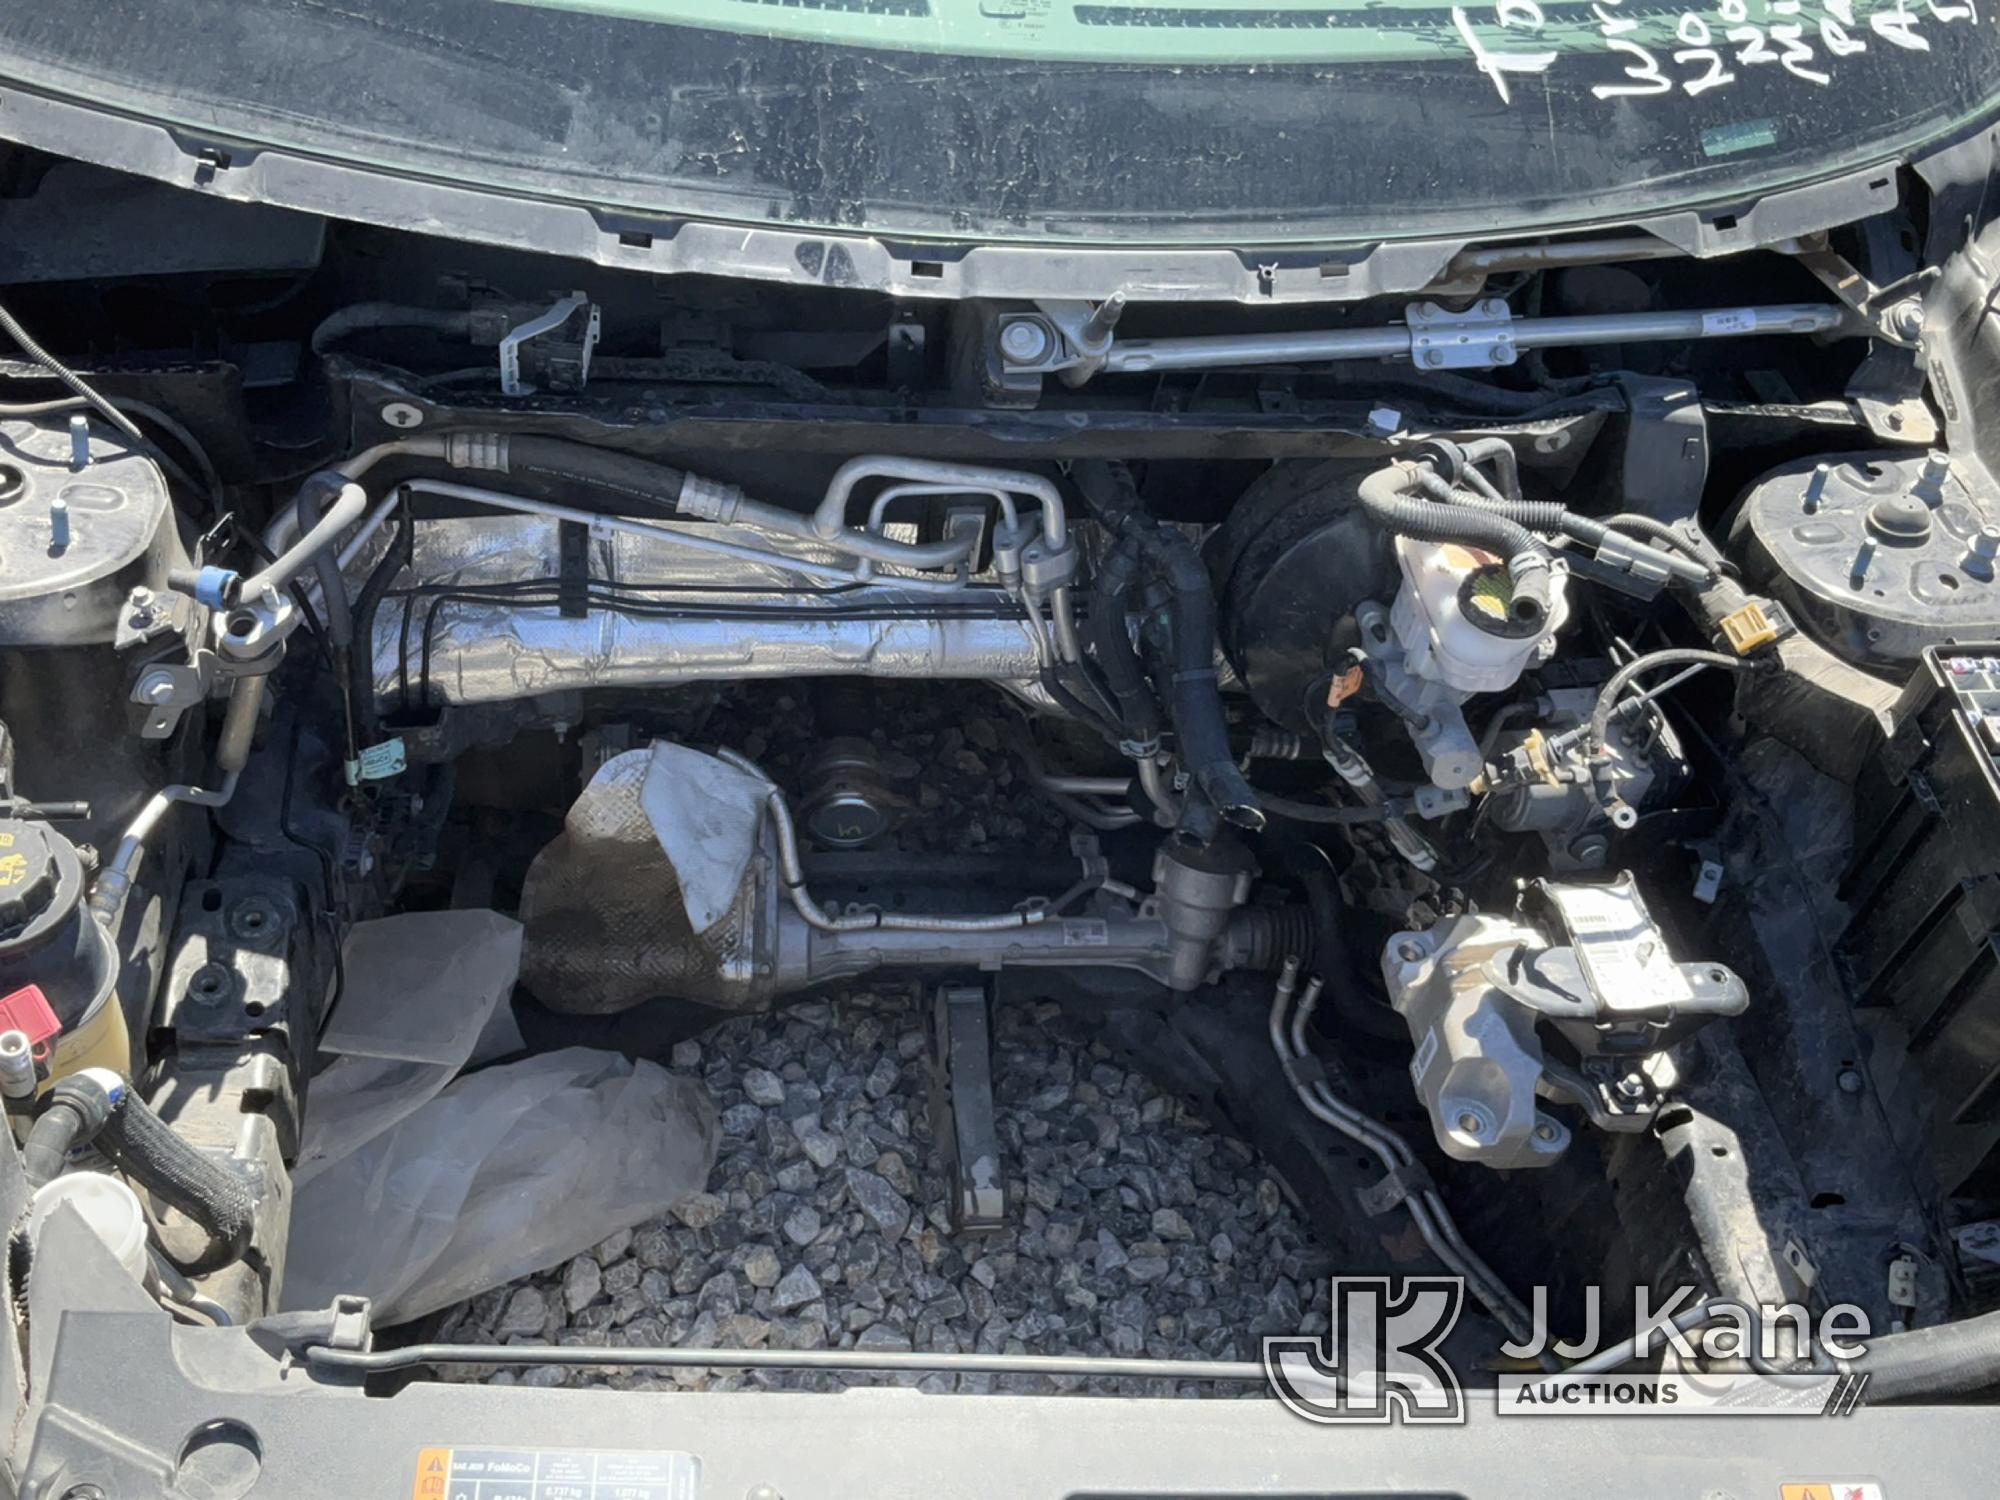 (Las Vegas, NV) 2018 Ford Explorer AWD Police Interceptor Dealers Only, Airbags Deployed, Wrecked, M